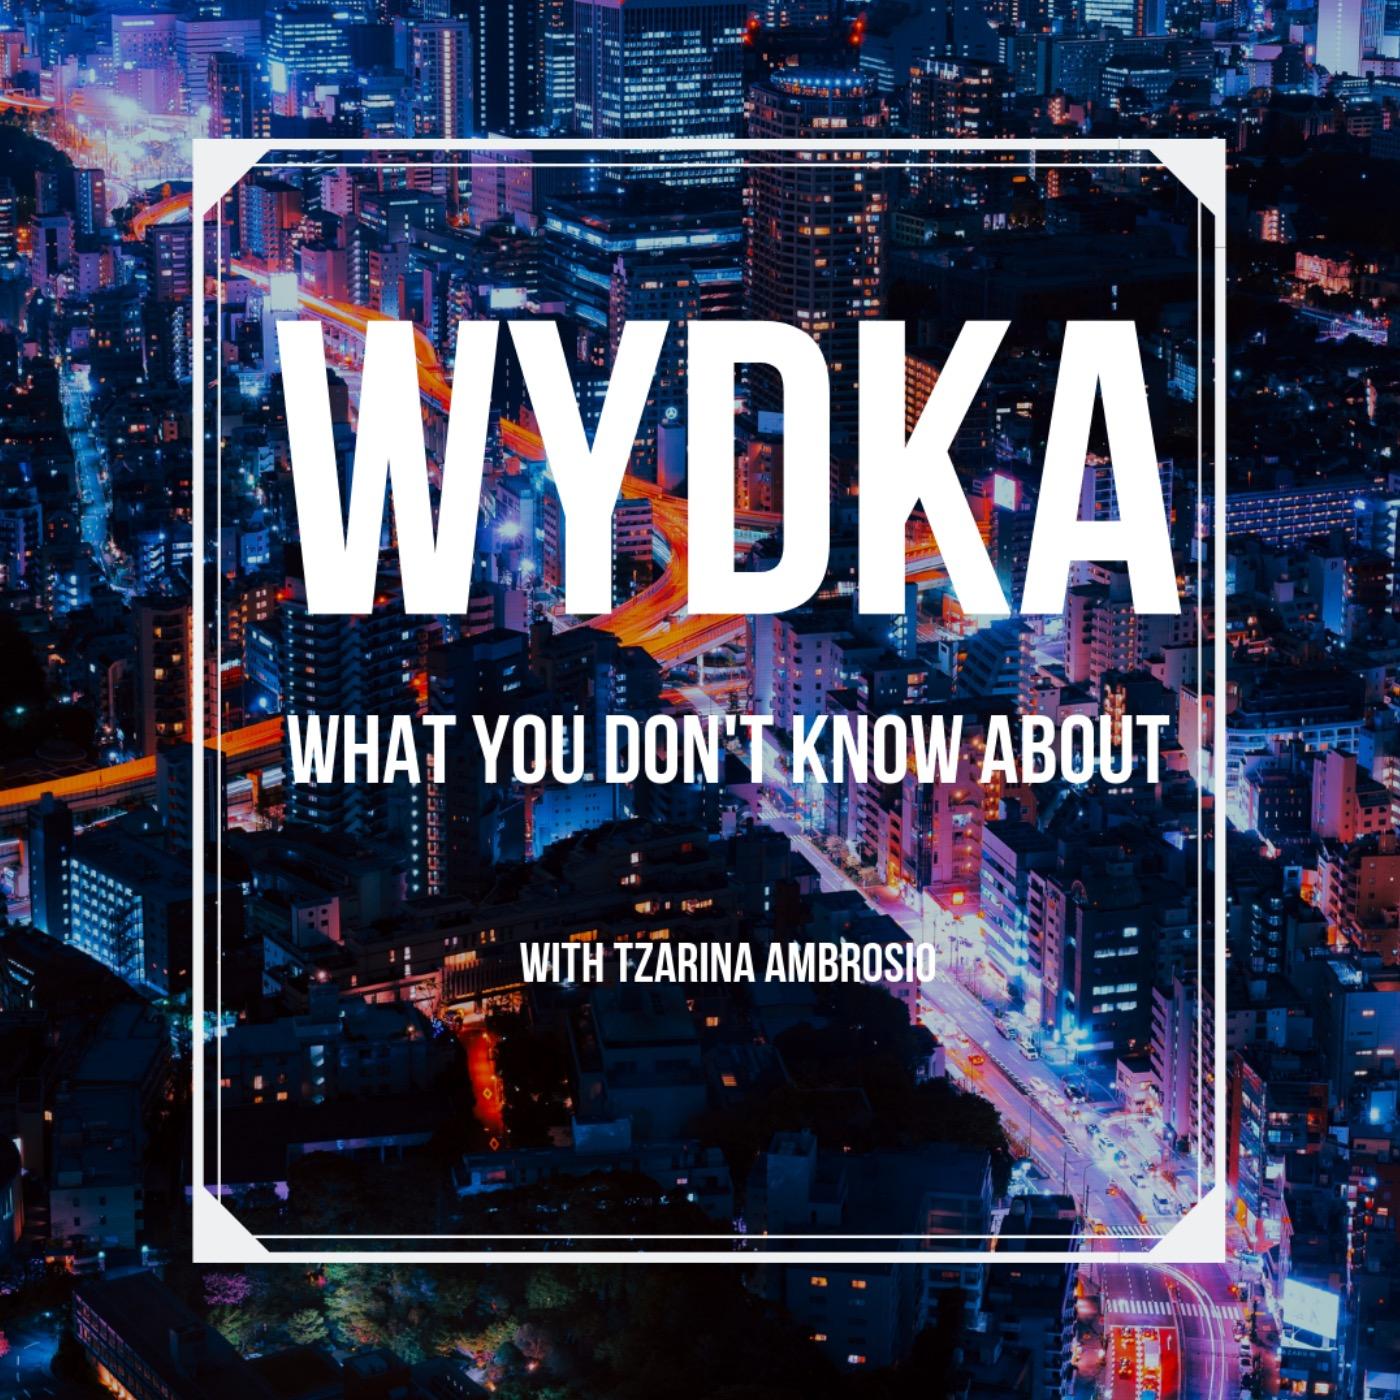 What you don't know about (WYDKA)